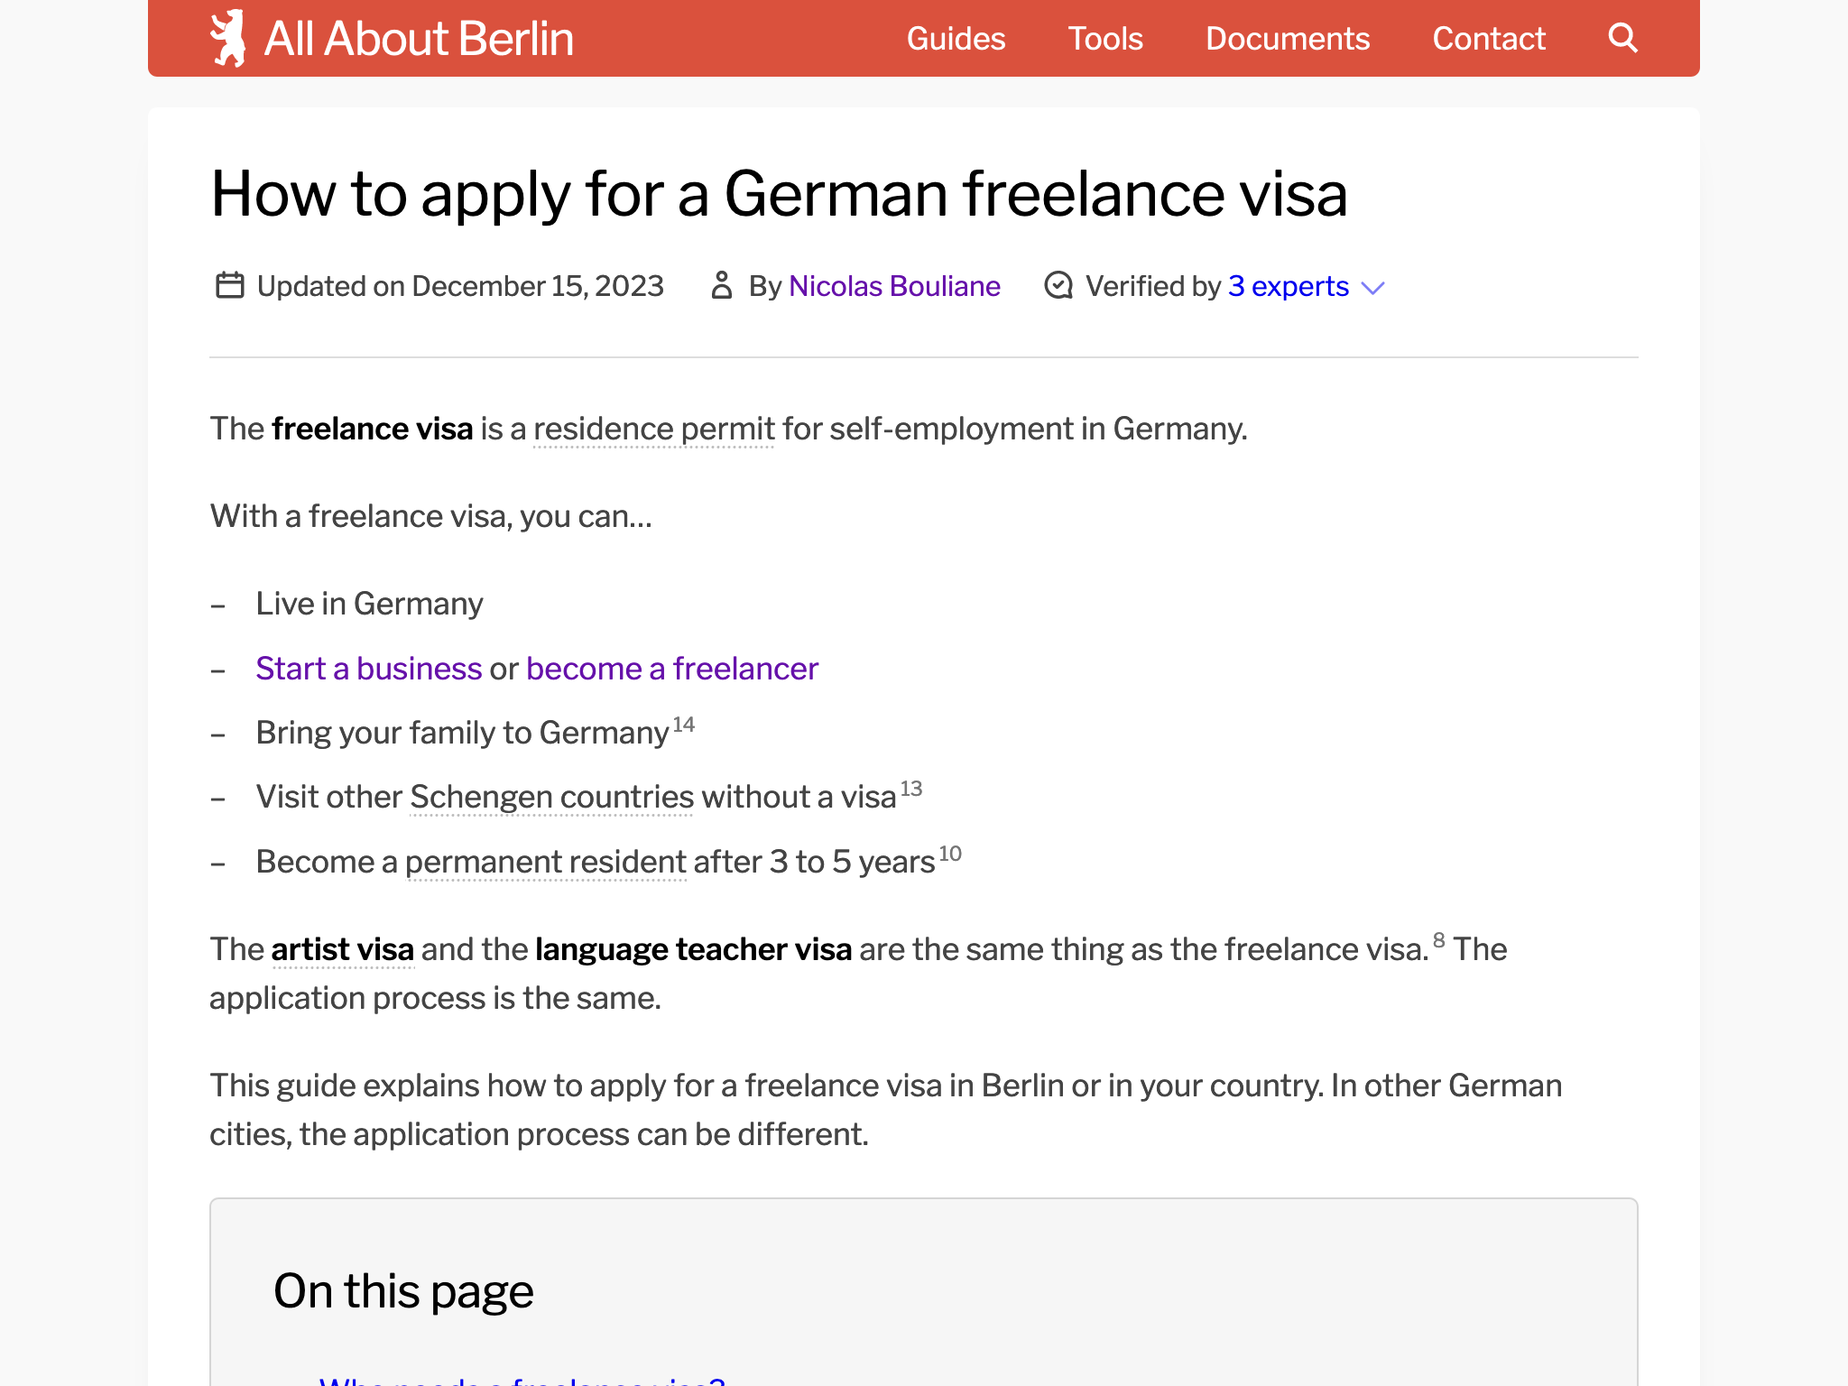 Freelance visa guide on All About Berlin